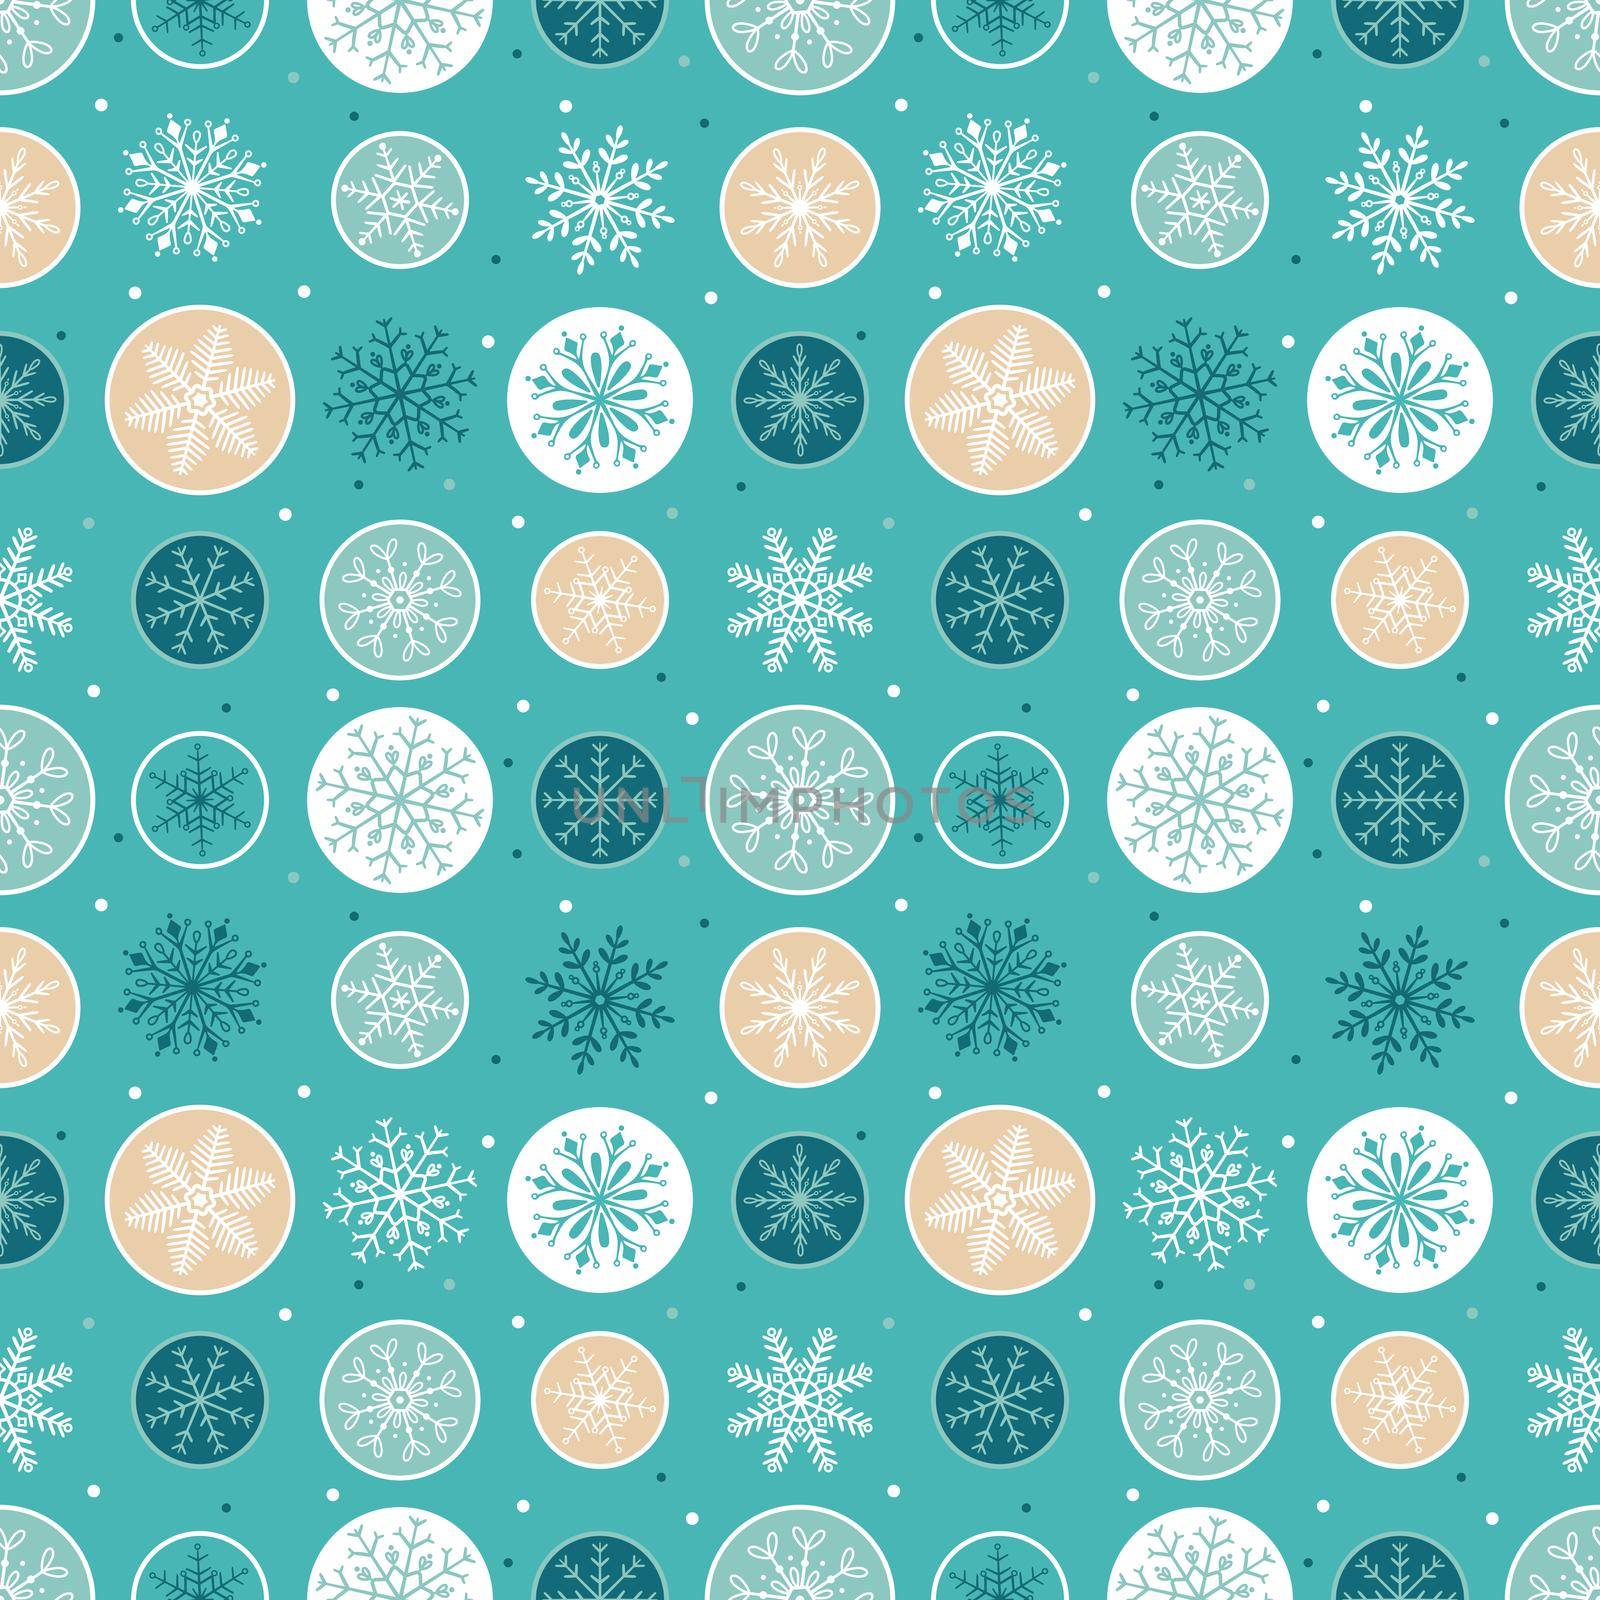 Seamless winter pattern with snowflakes. Vector illustration